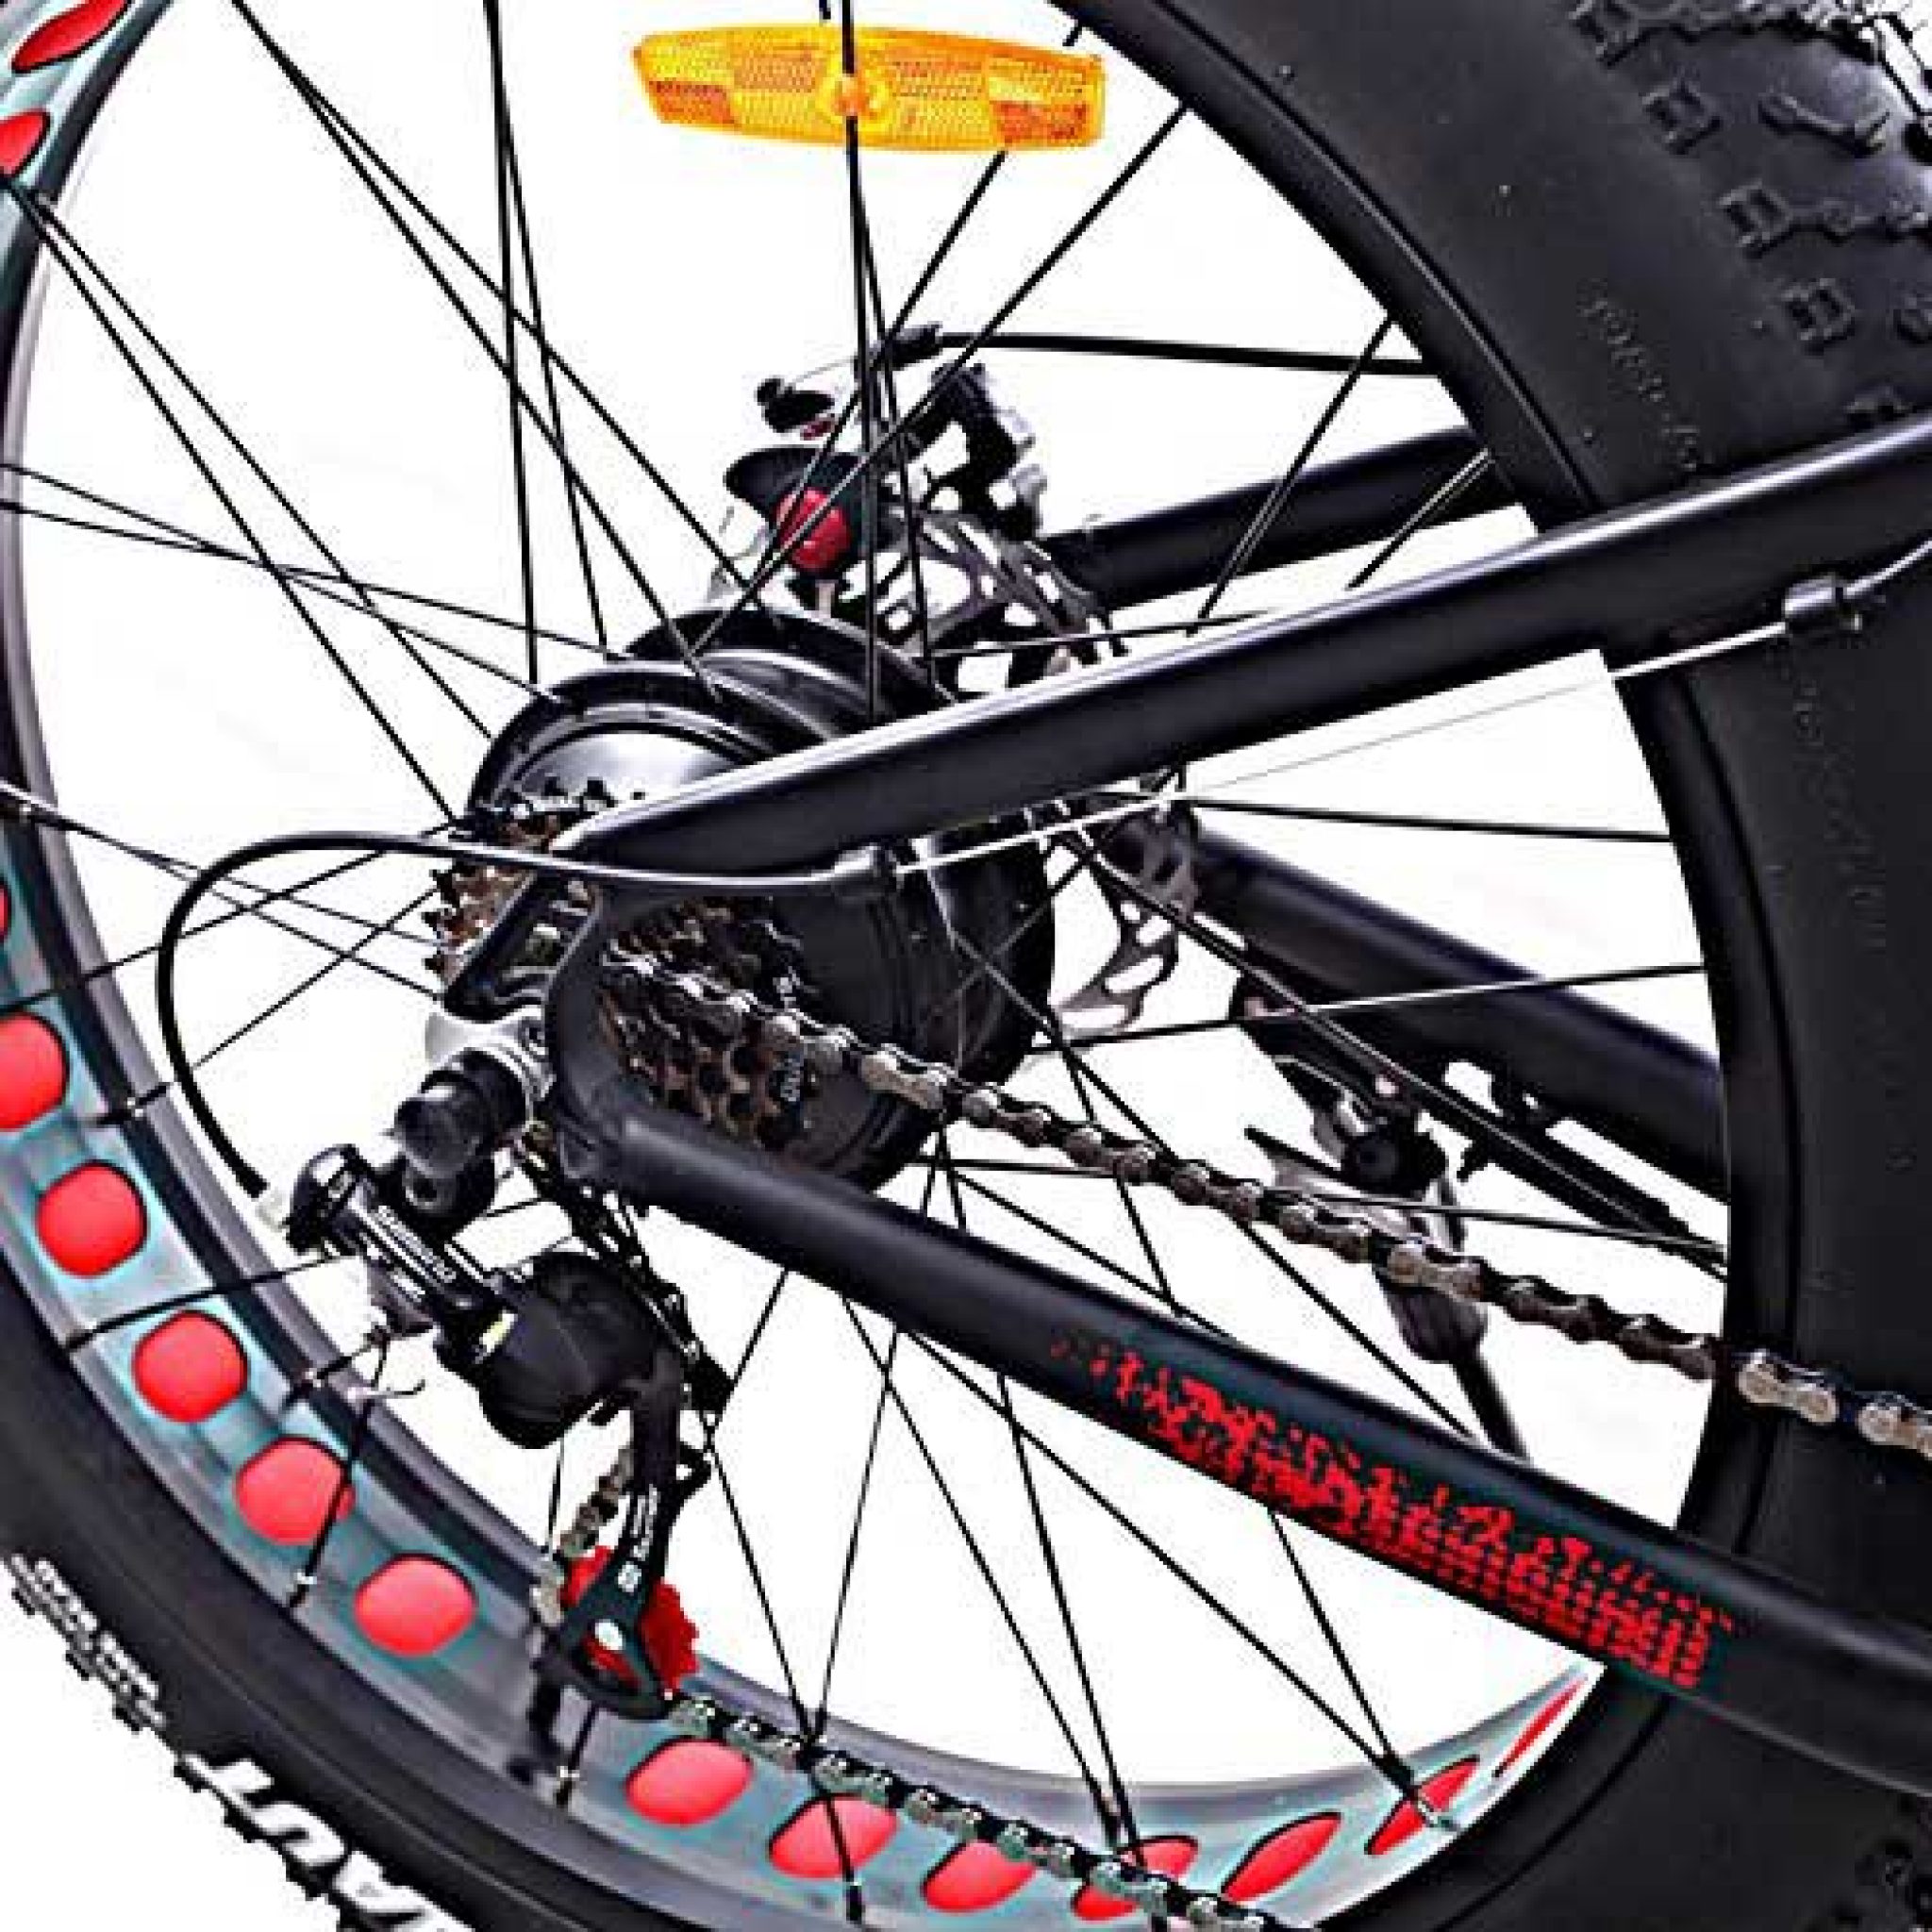 Cyclamatic Fat Tire Electric Mountain Bike | We Are The Cyclists